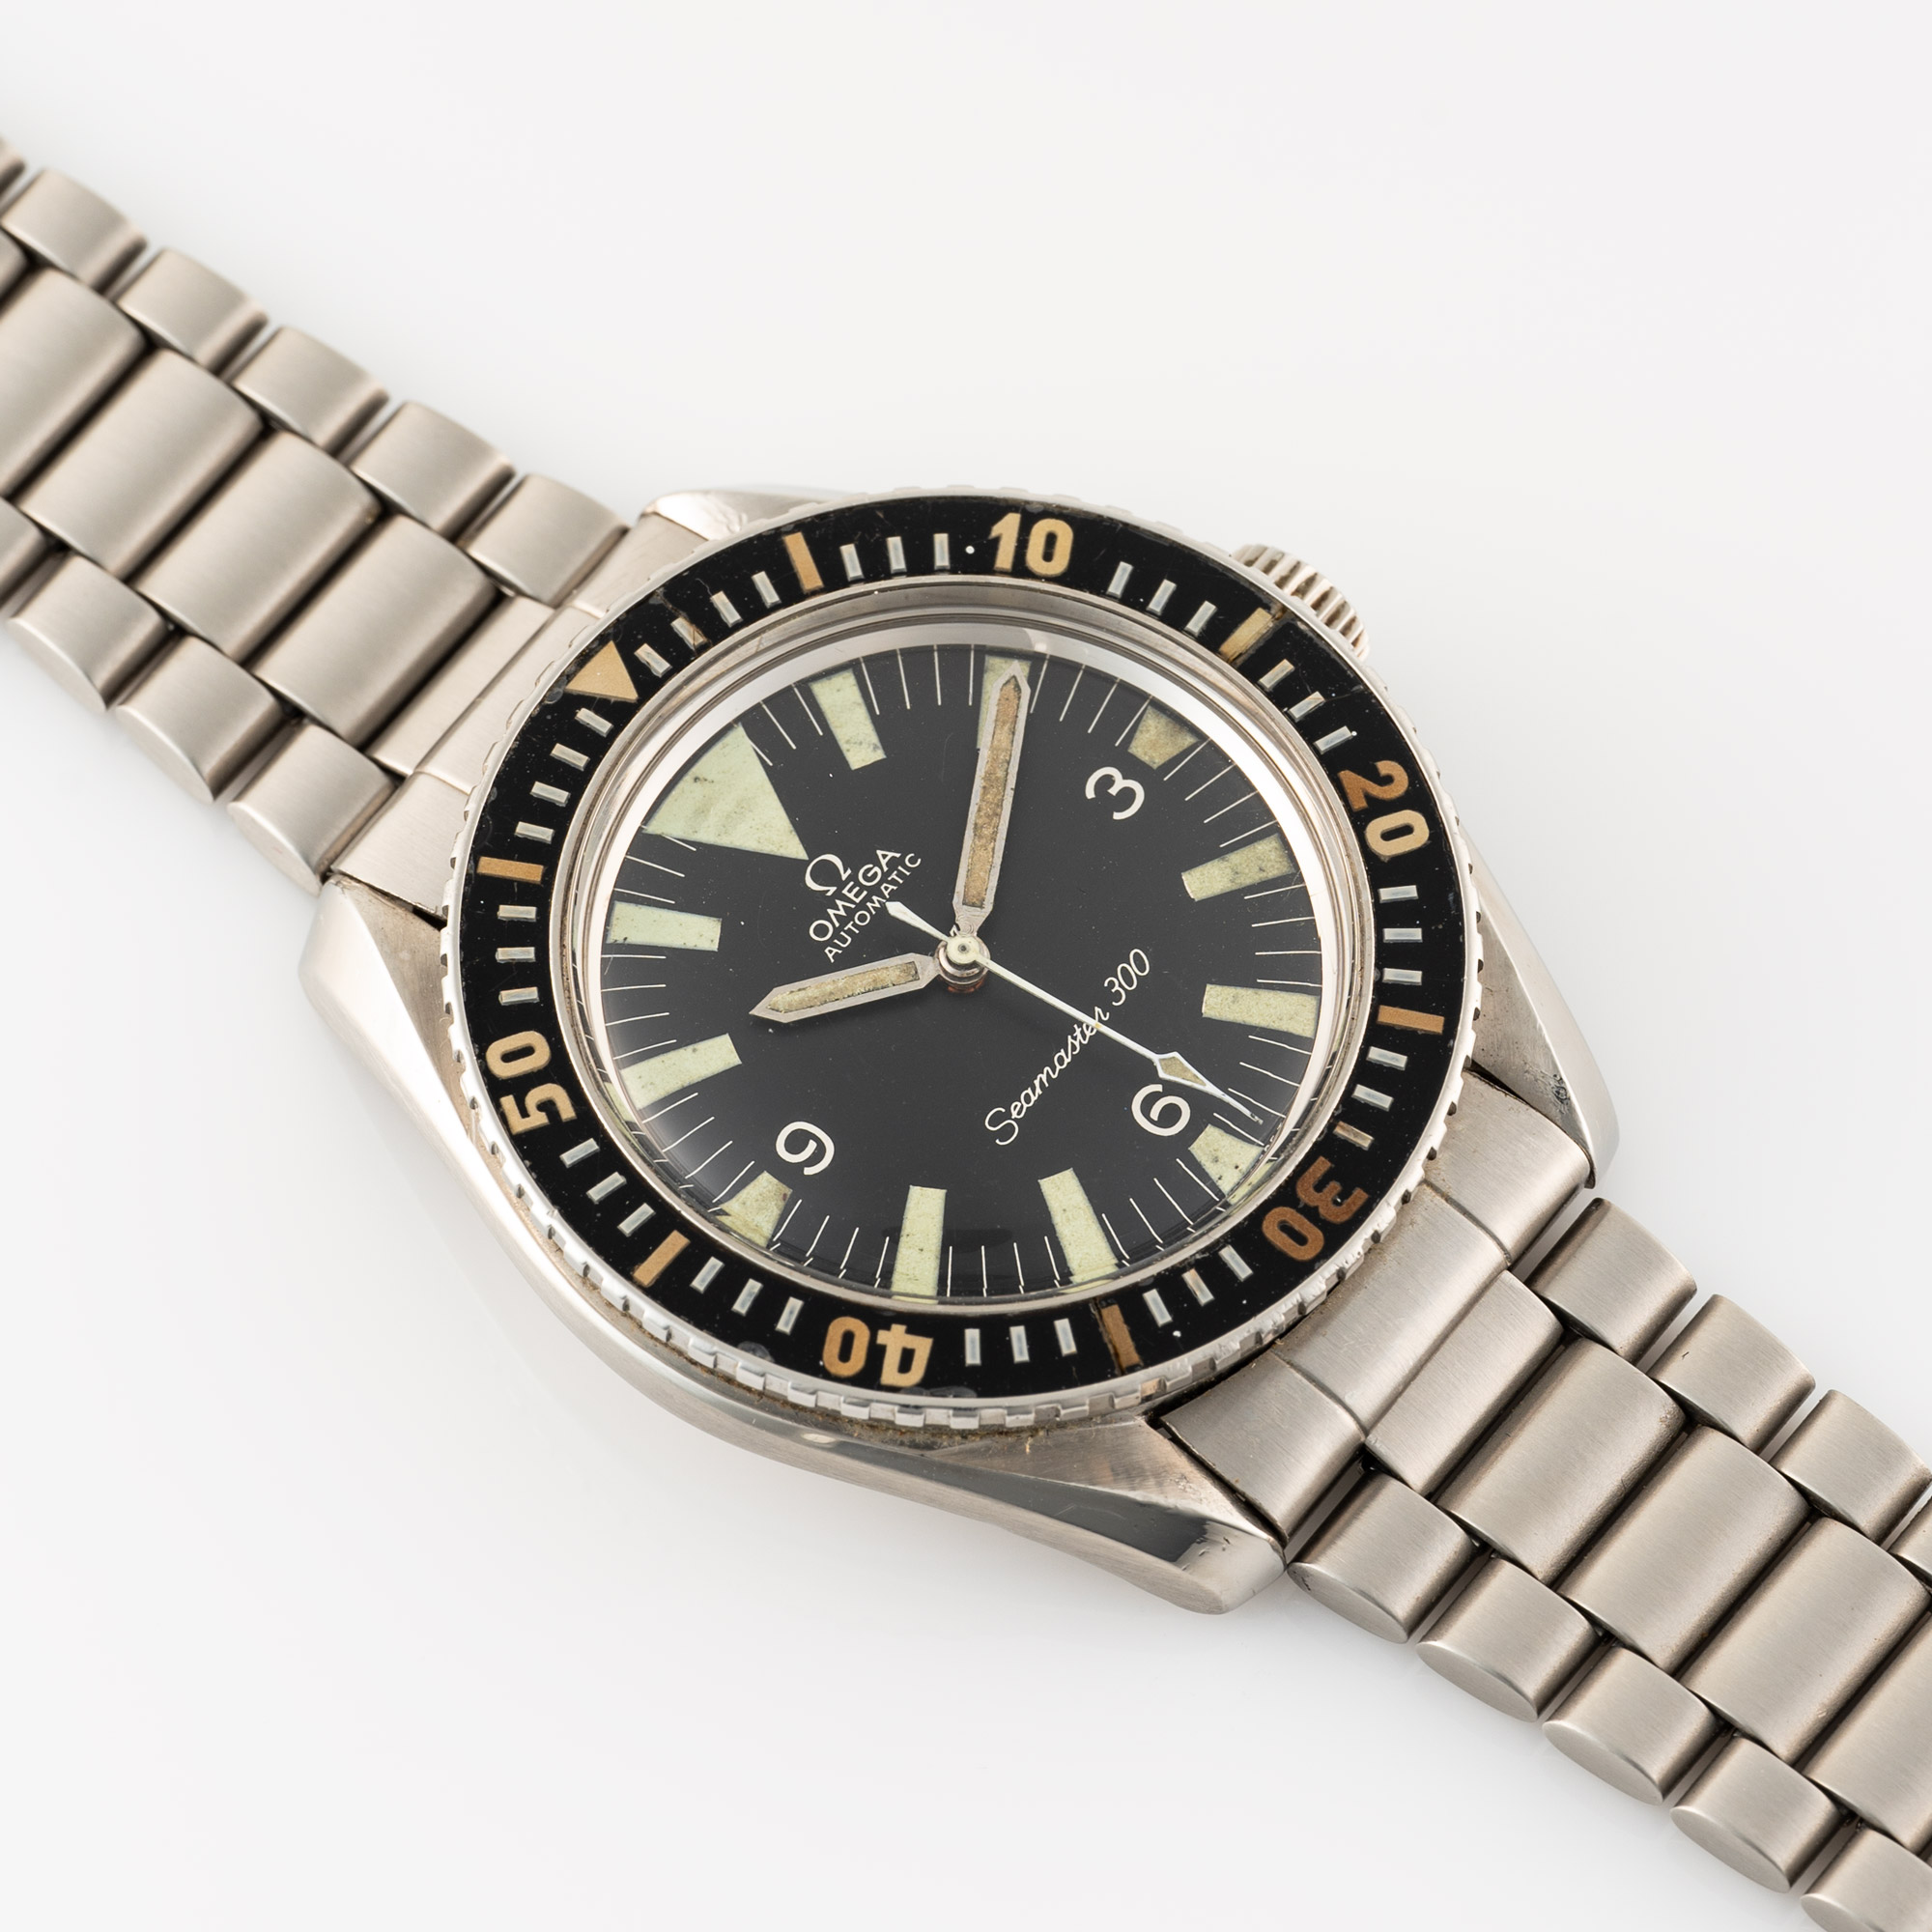 A GENTLEMAN'S SIZE STAINLESS STEEL OMEGA SEAMASTER 300 DIVERS BRACELET WATCH CIRCA 1965, REF. 165. - Image 5 of 10